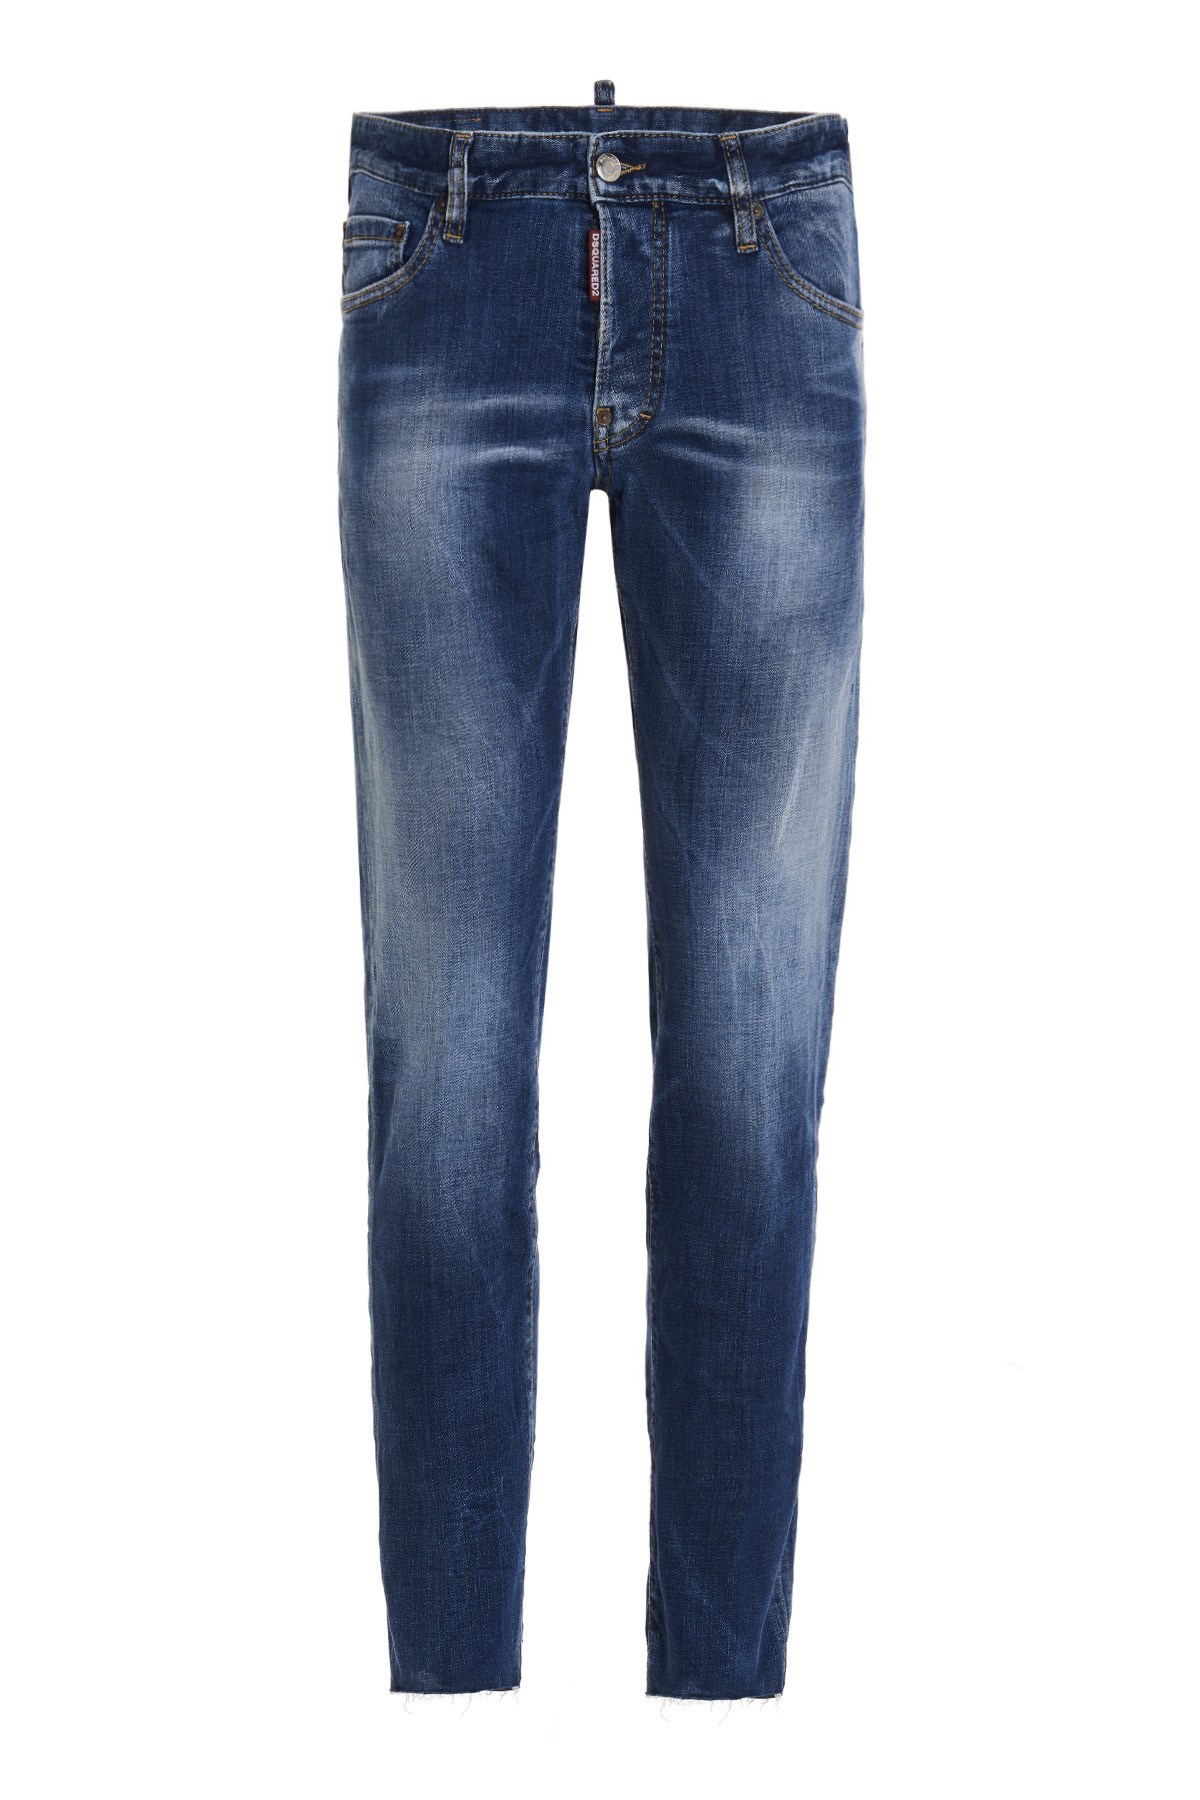 DSQUARED2 Jeans 'Slim Cropped'